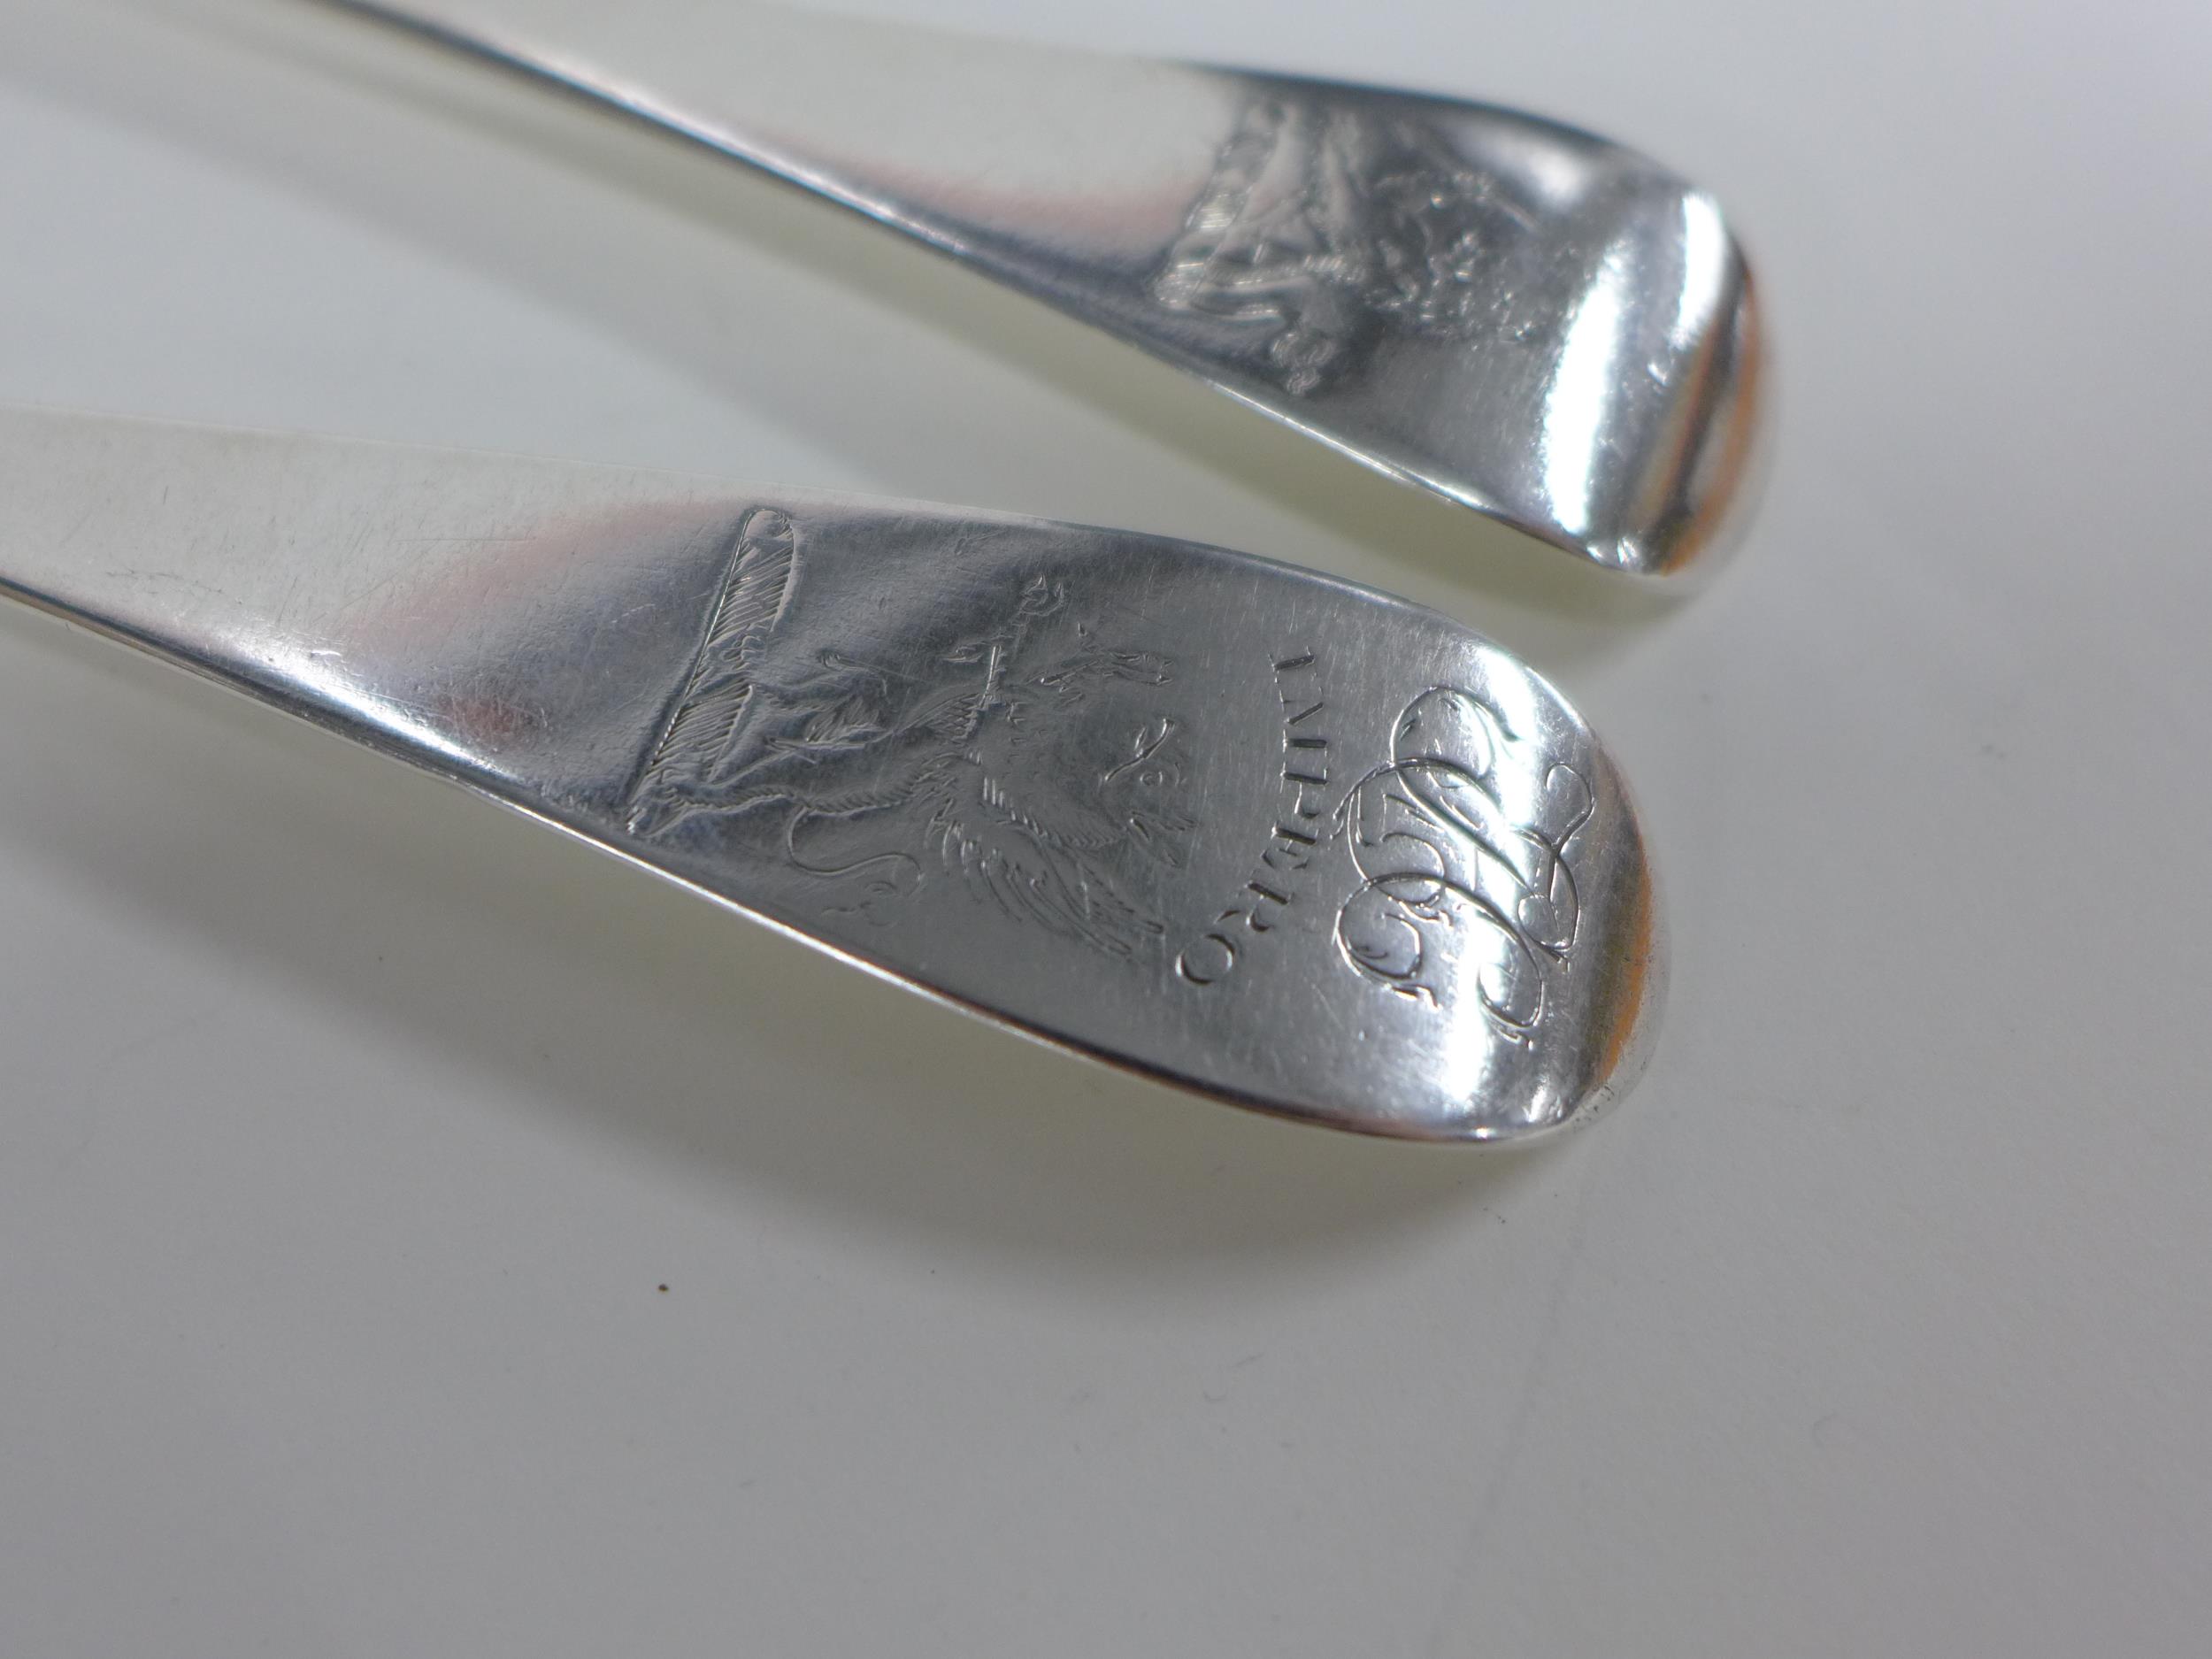 Rare George II hanoverian silver table spoon by William Aytoun, Edinburgh 1745 with engraved crest - Image 3 of 6